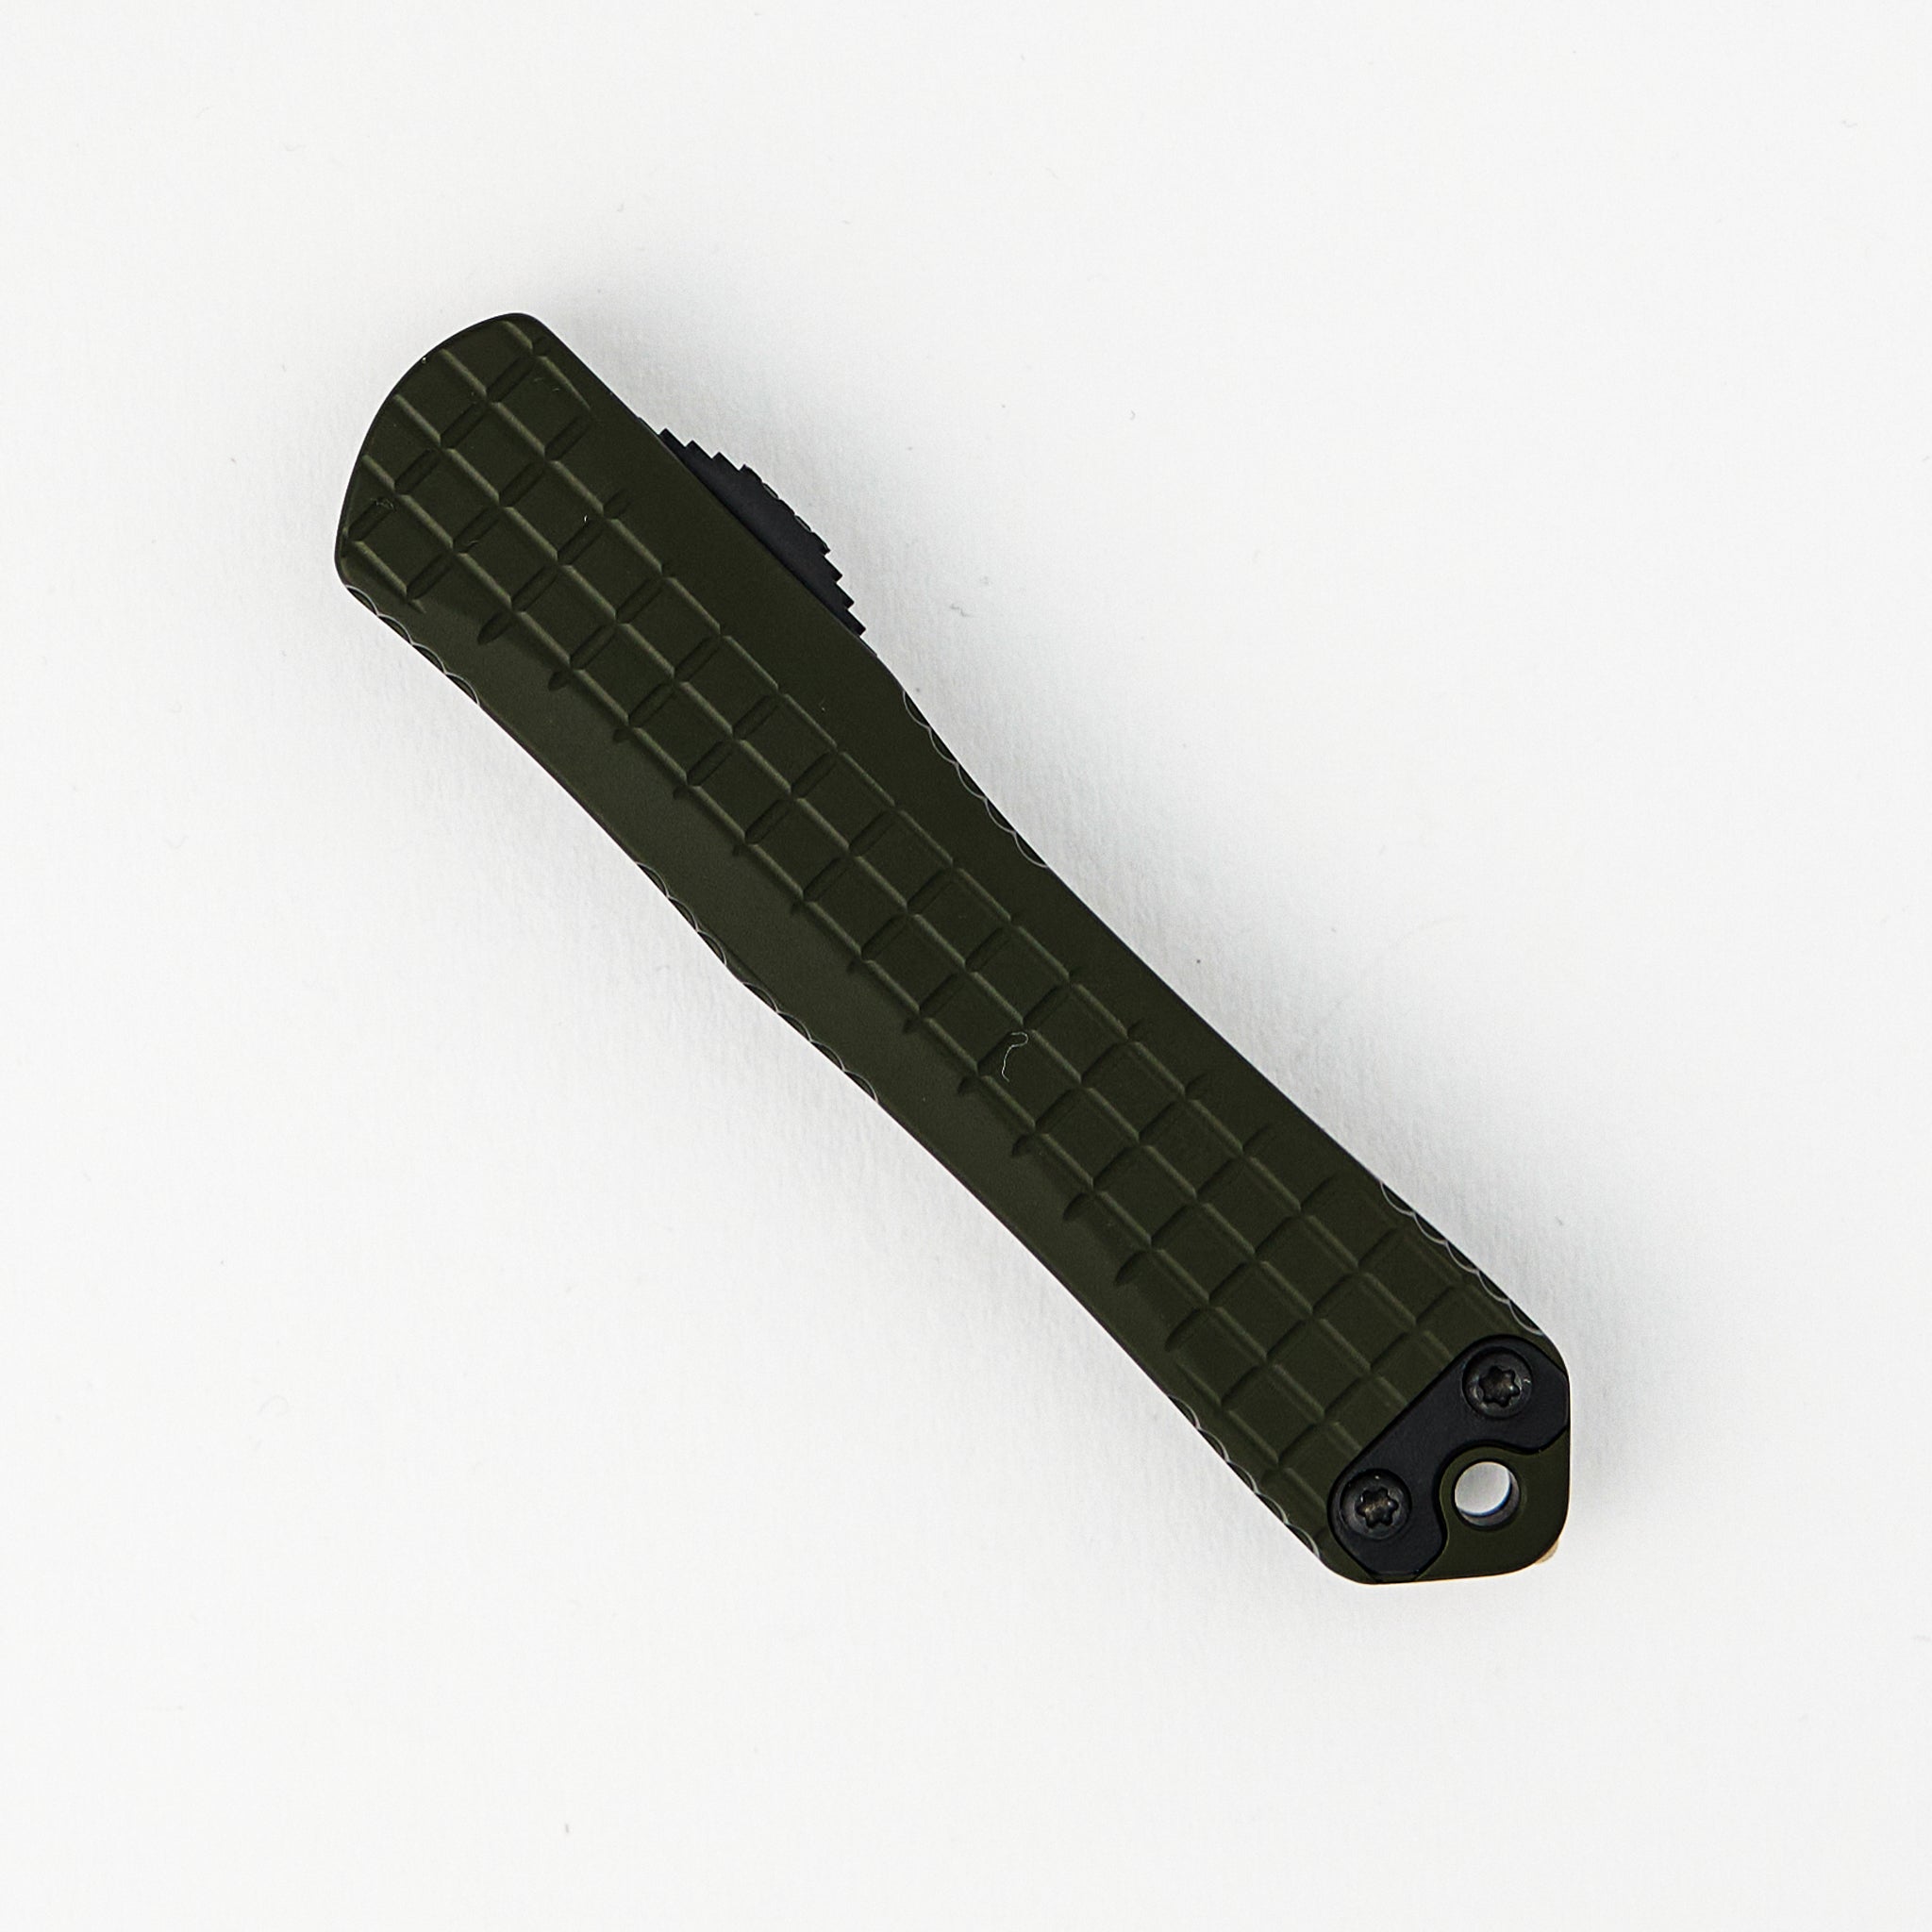 Heretic Manticore S - Two-Tone D/E Frag OD Green